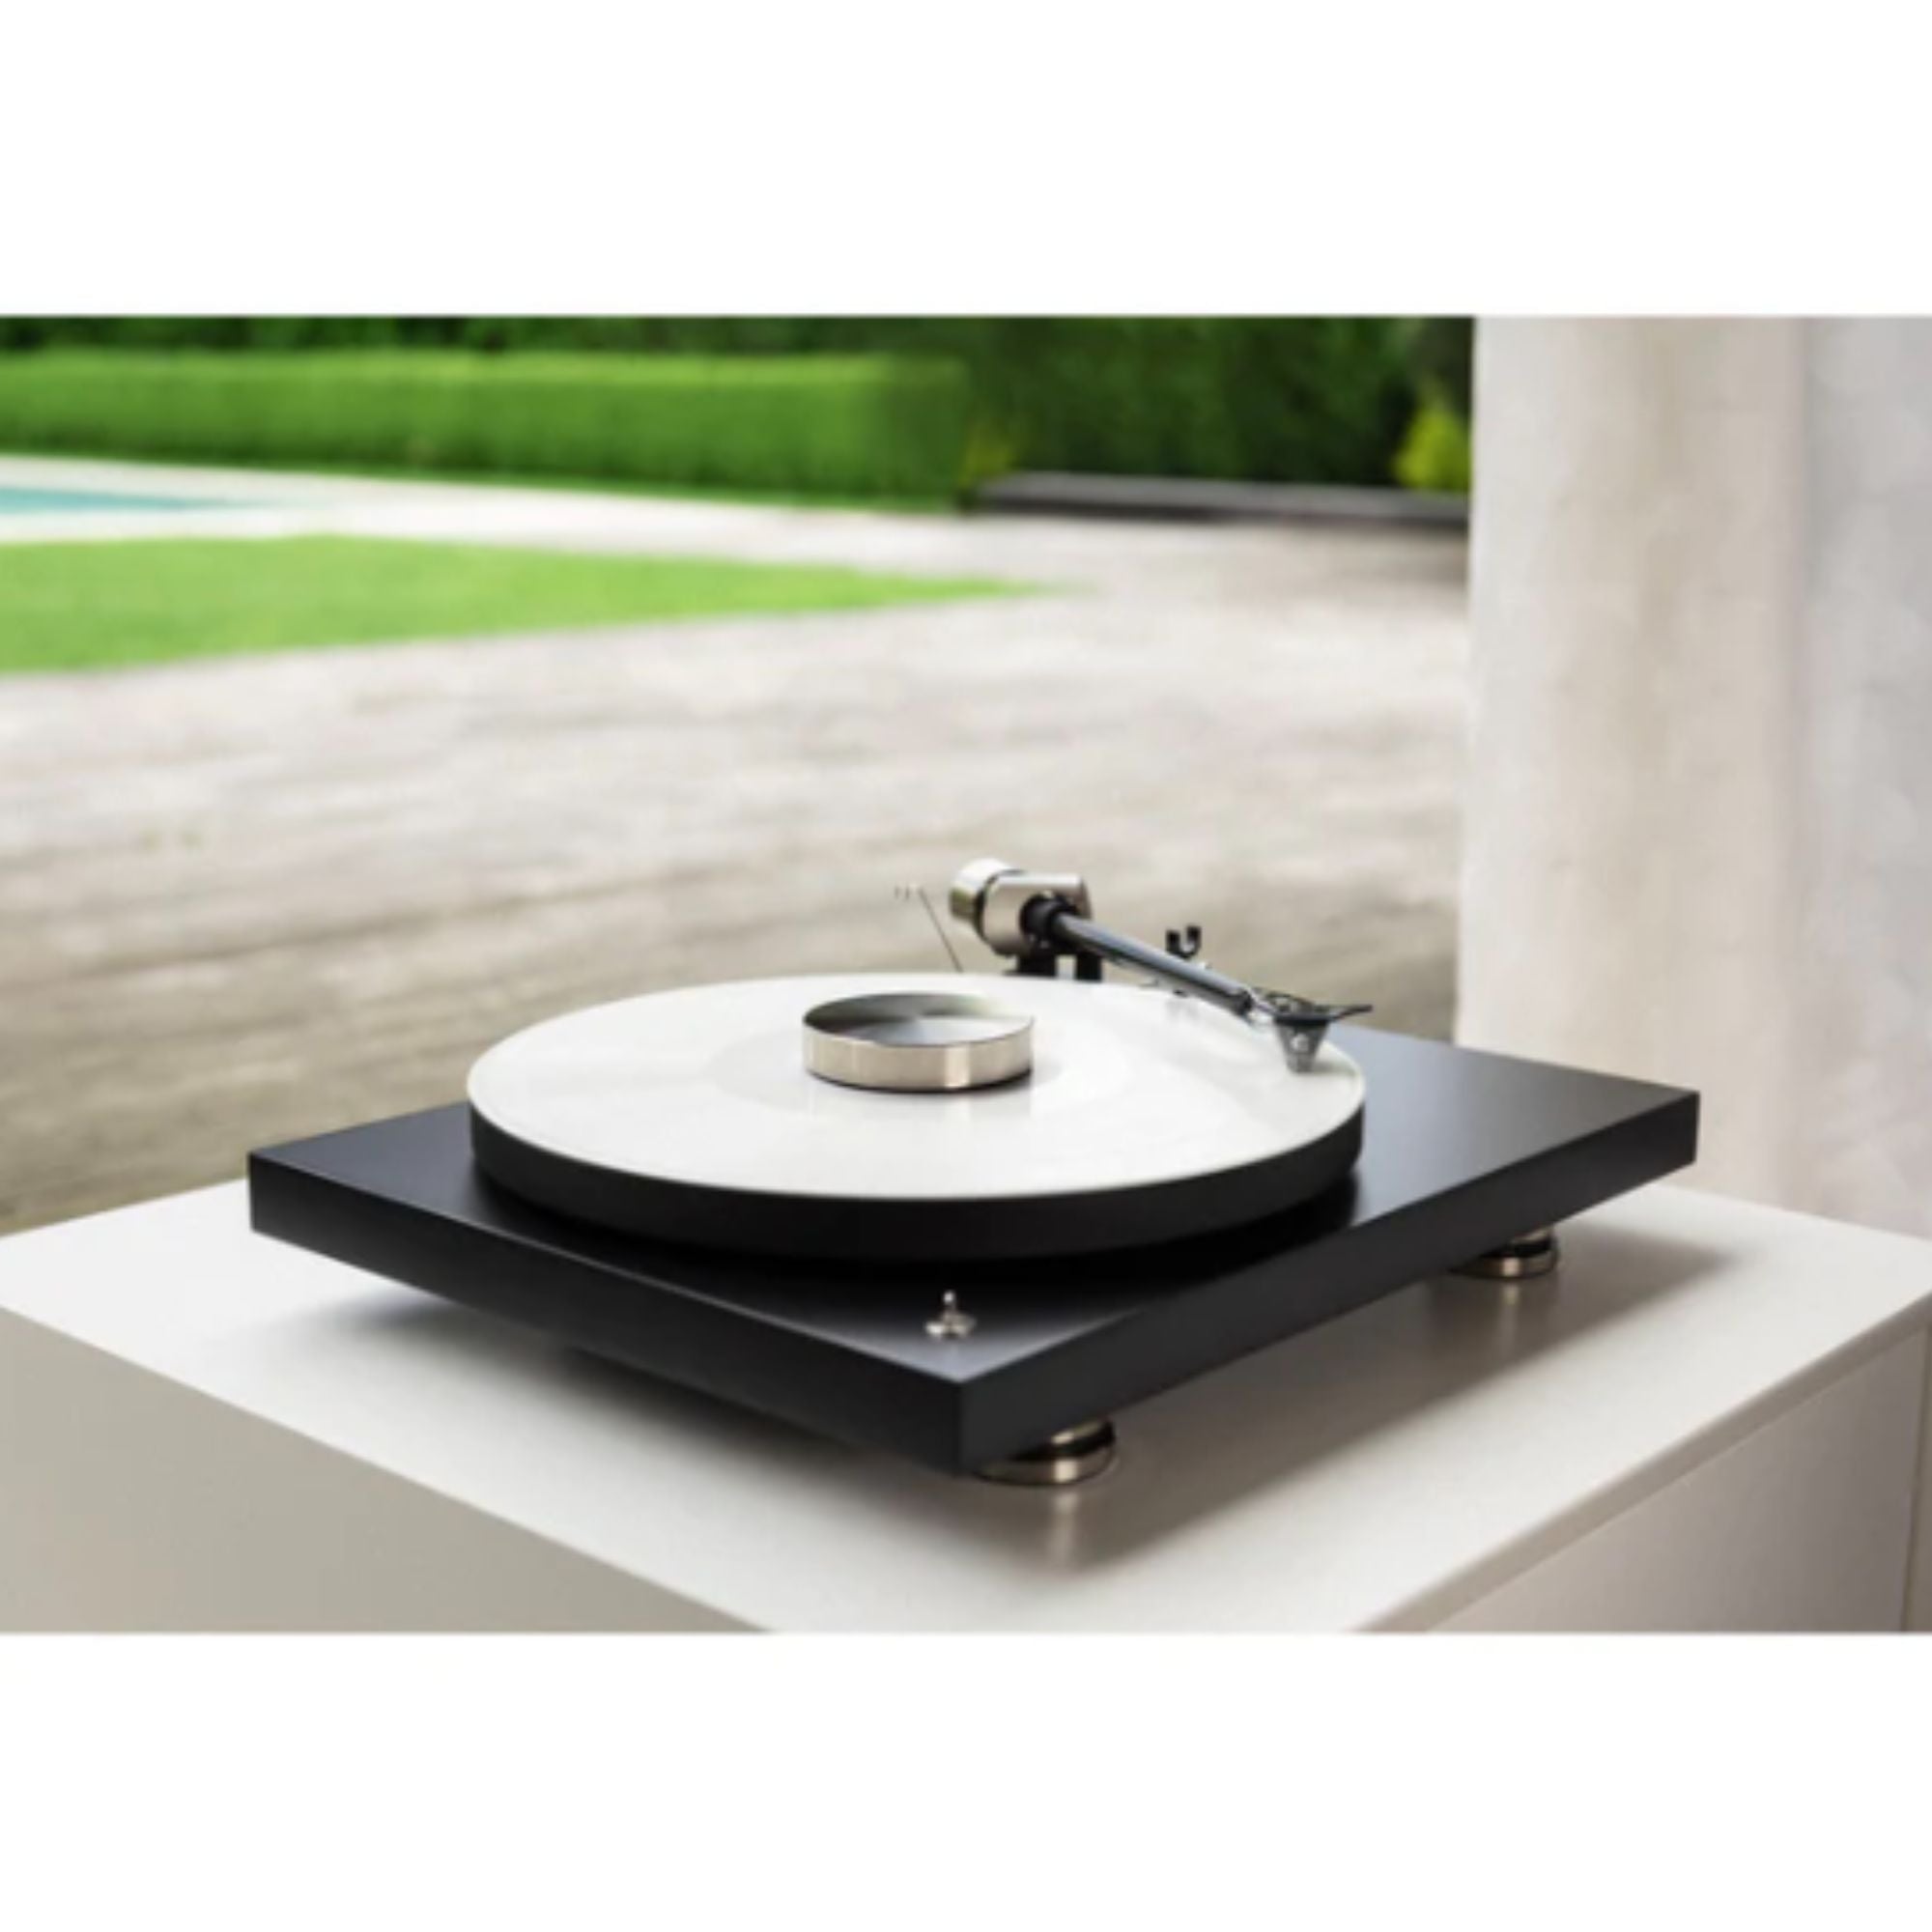 Pro-Ject Debut Pro review: the most sophisticated Debut turntable yet